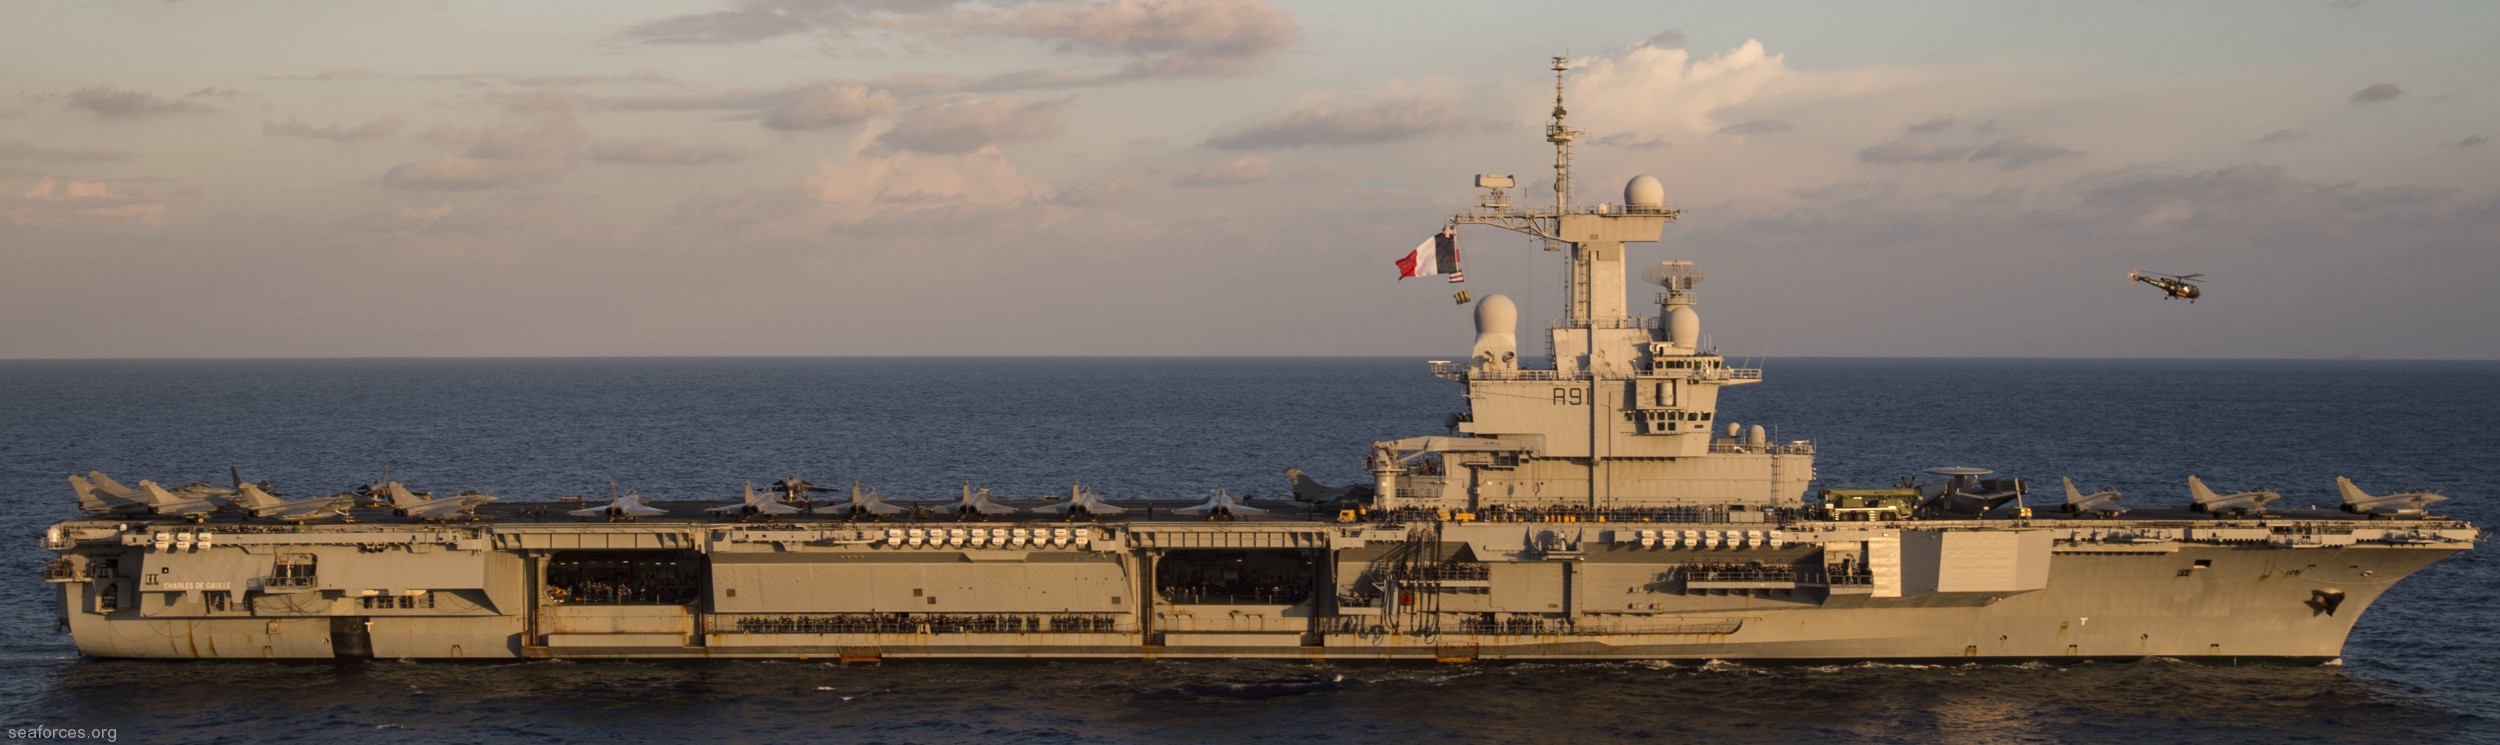  r-91 fs charles de gaulle aircraft carrier french navy 44